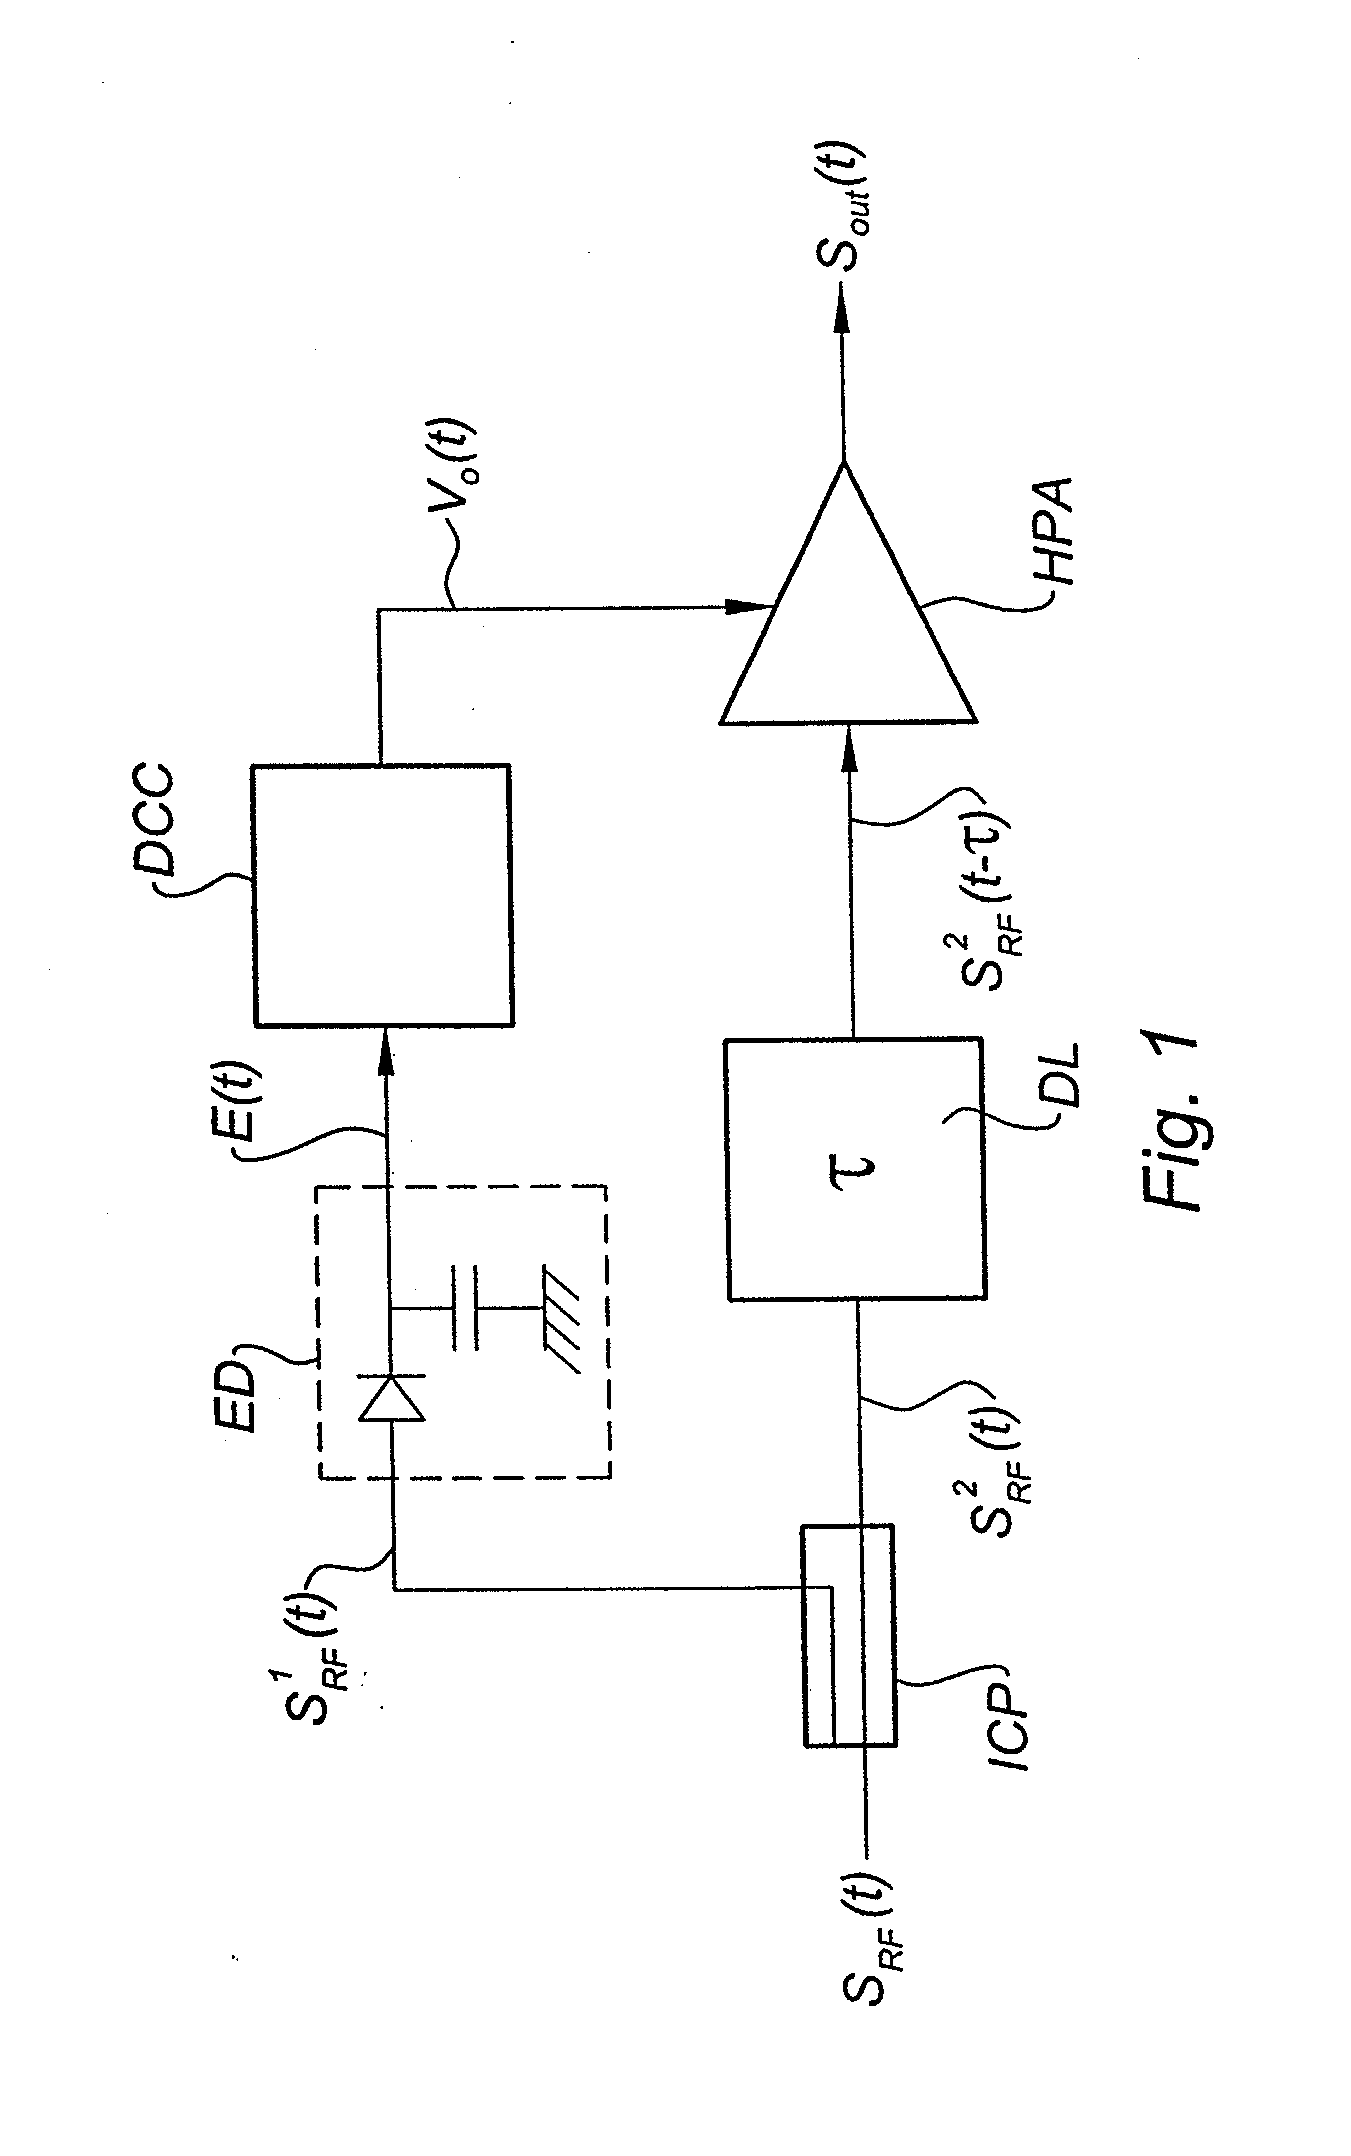 Radio-Frequency Power Amplifier with Fast Envelope Tracking